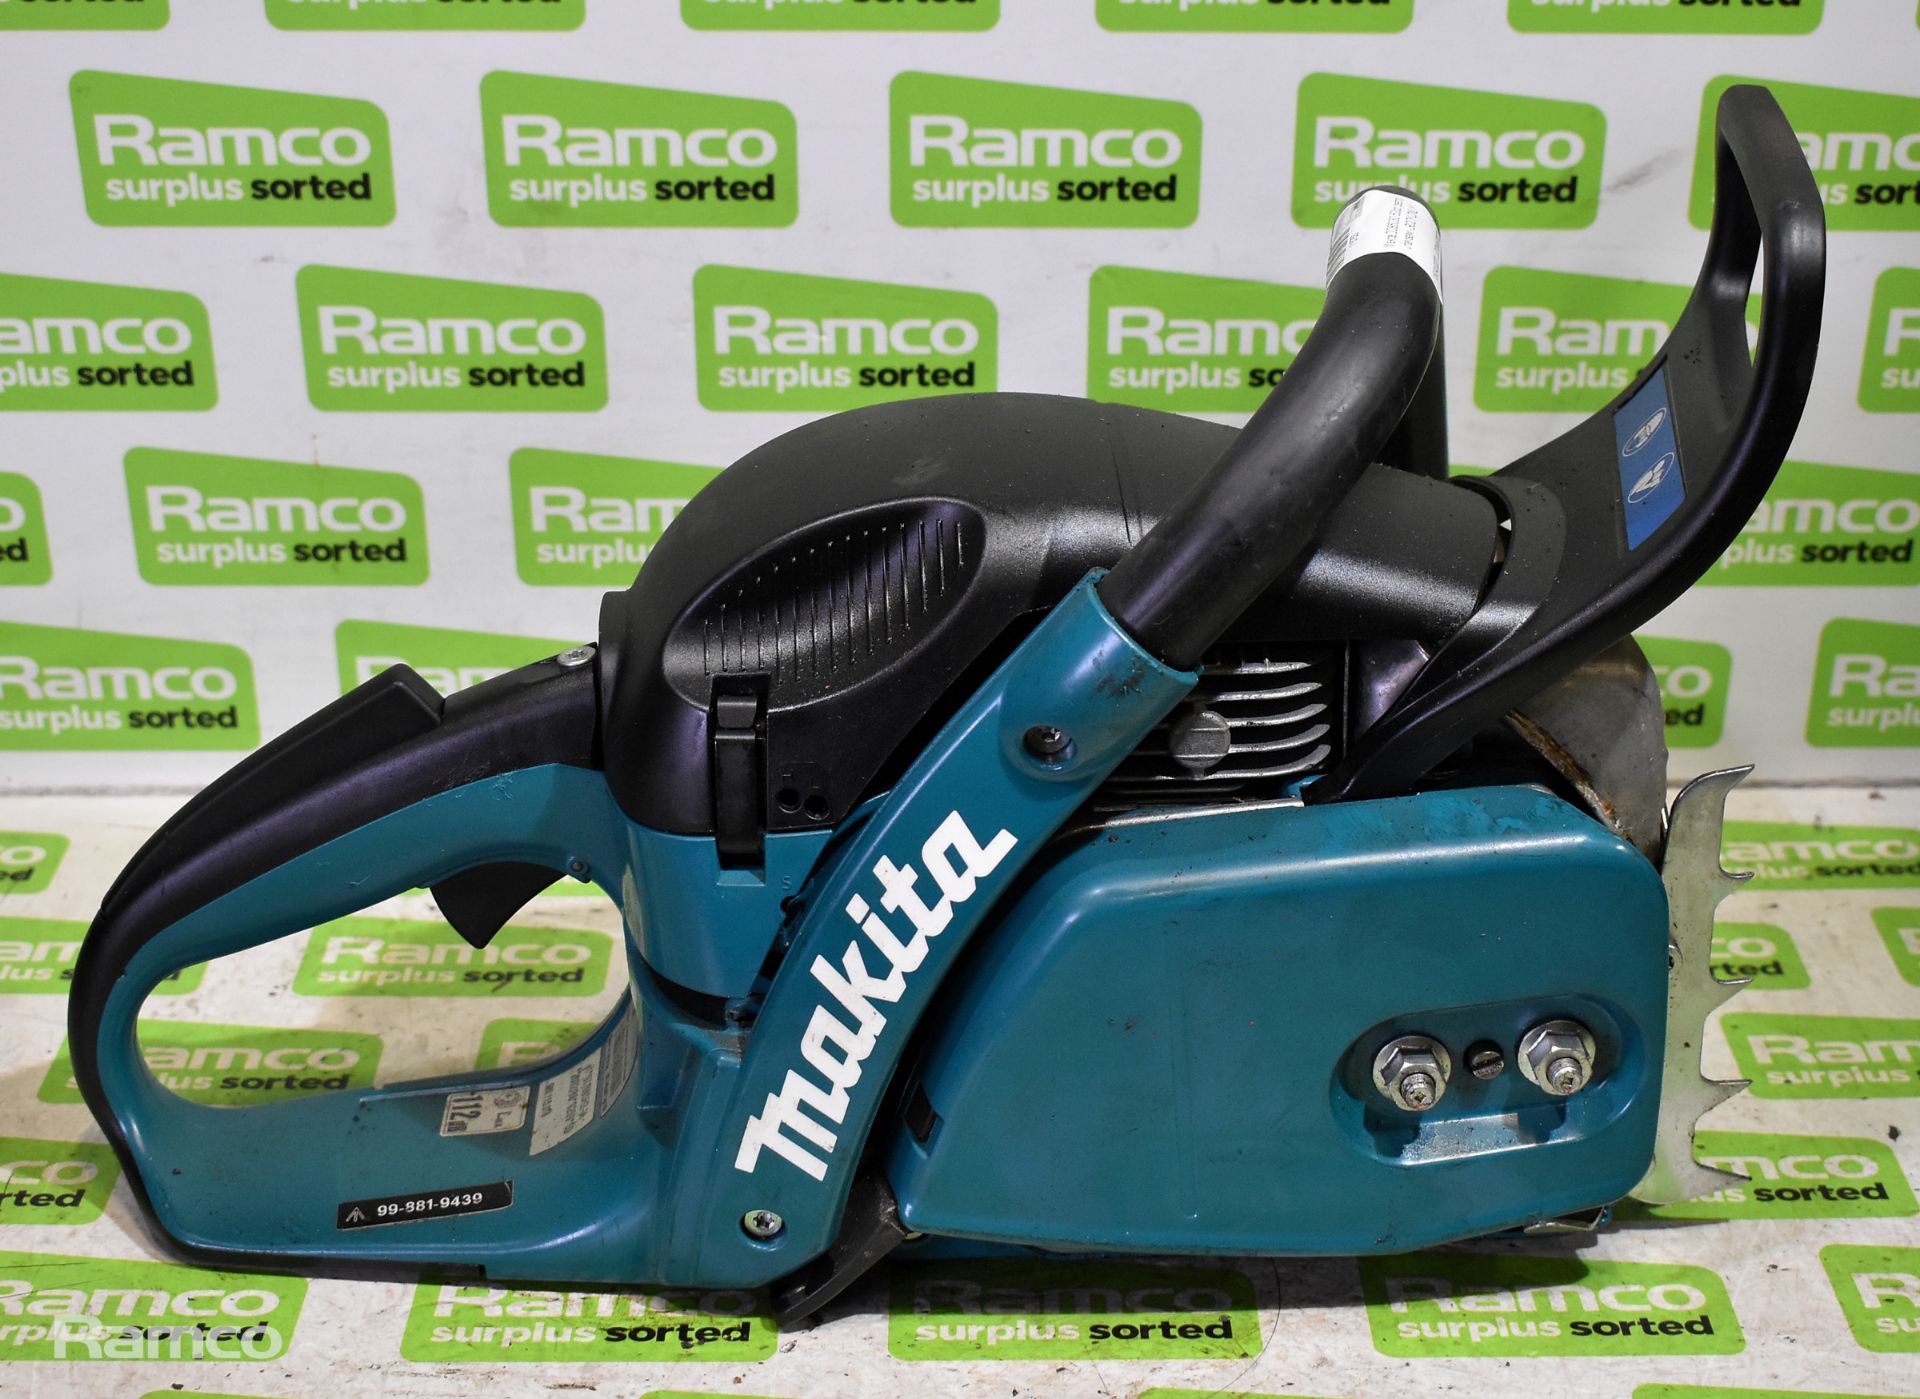 4x Makita DCS5030 50cc petrol chainsaws - BODIES ONLY - AS SPARES OR REPAIRS - Image 17 of 21